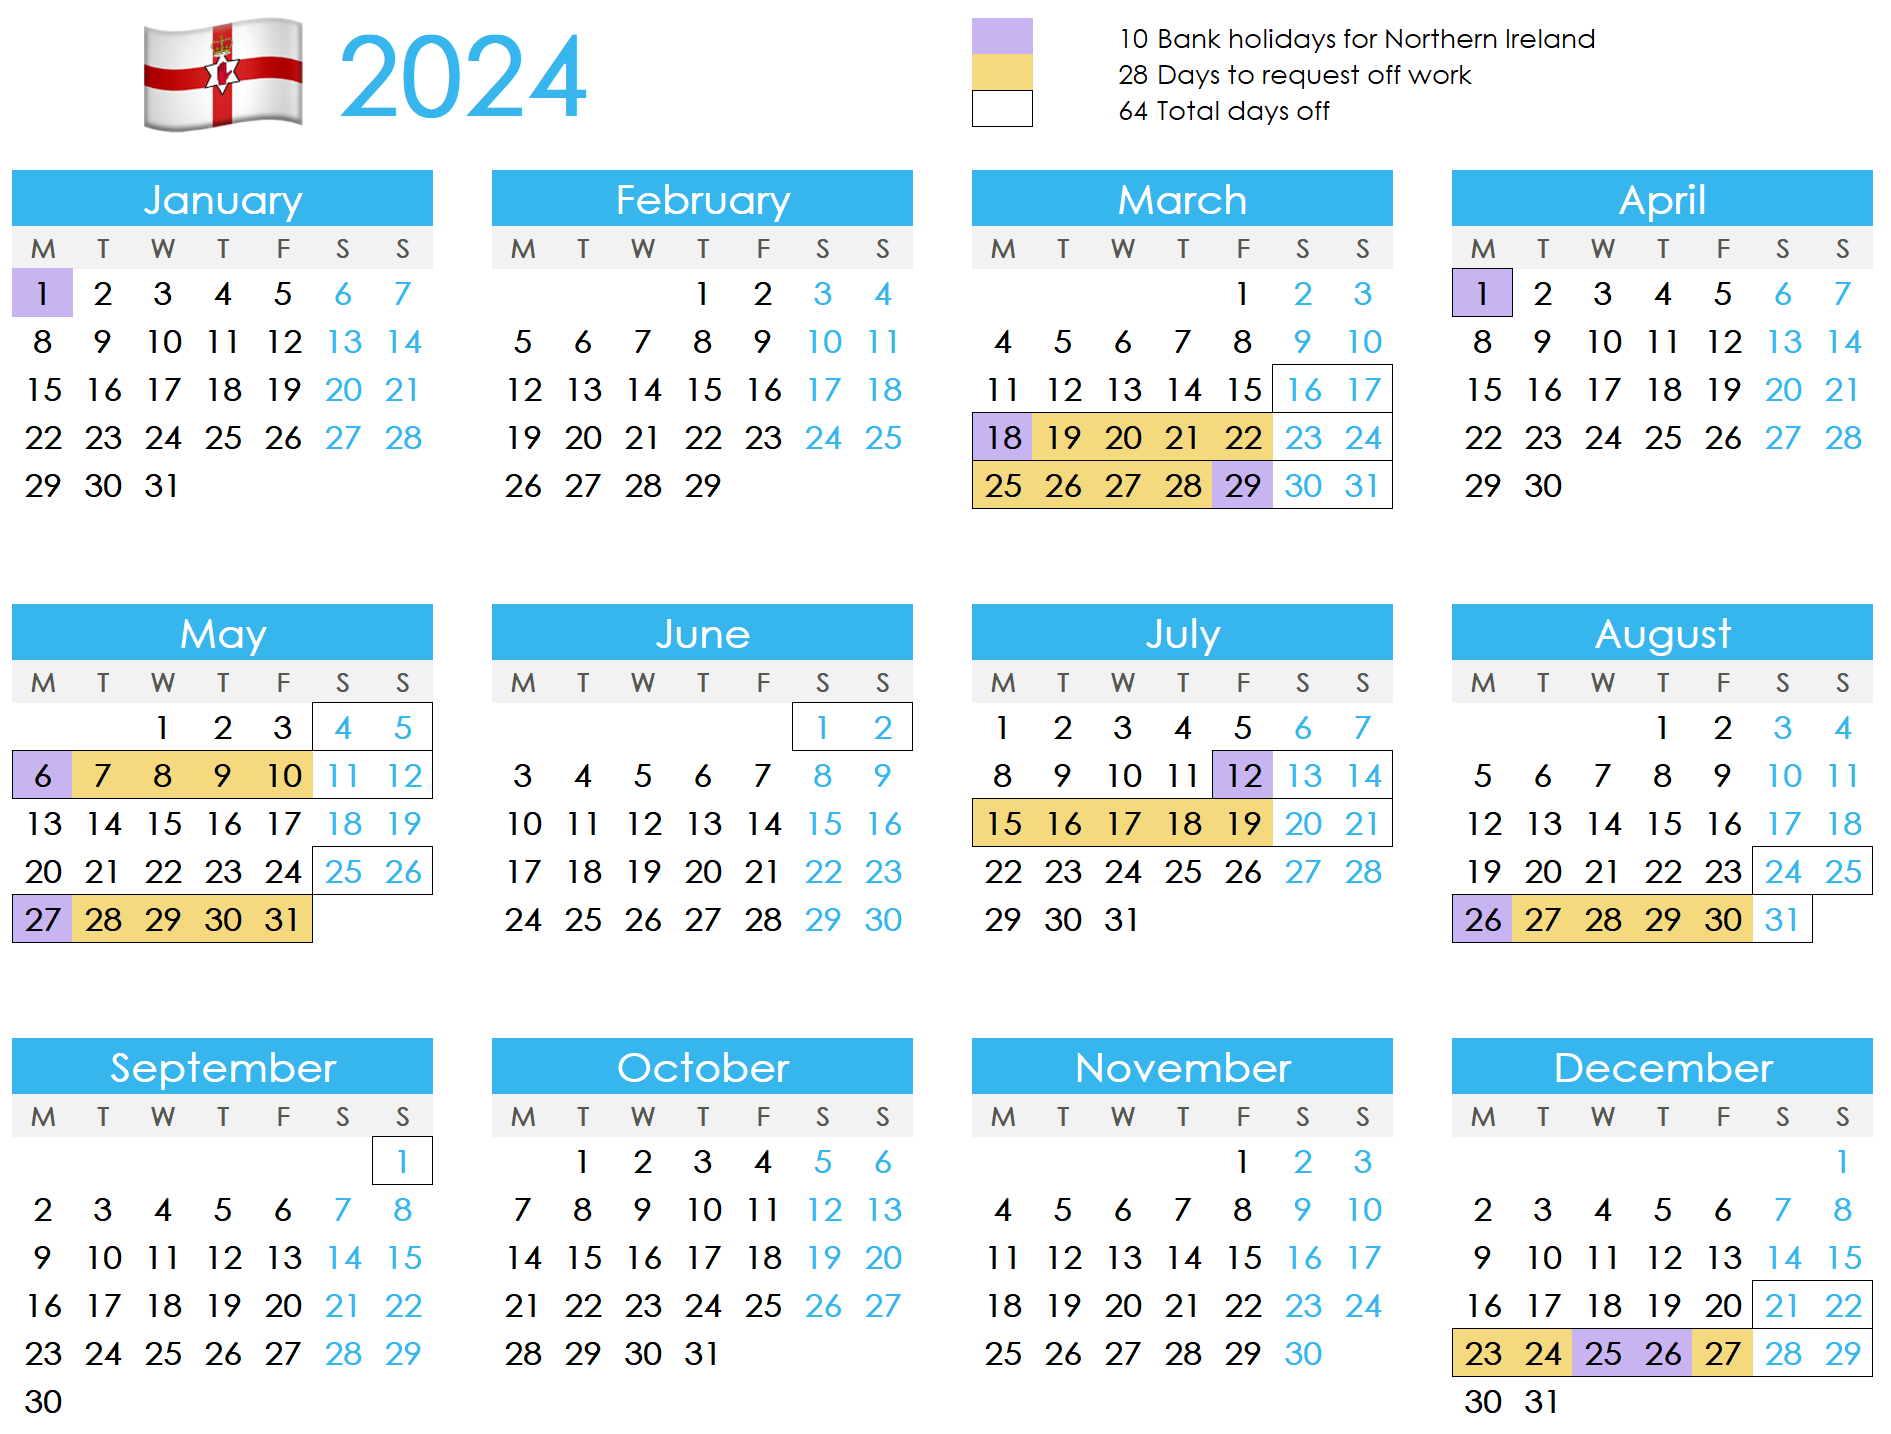 Calendar showing how to maximise annual leave in 2024 for uk northern ireland - NI